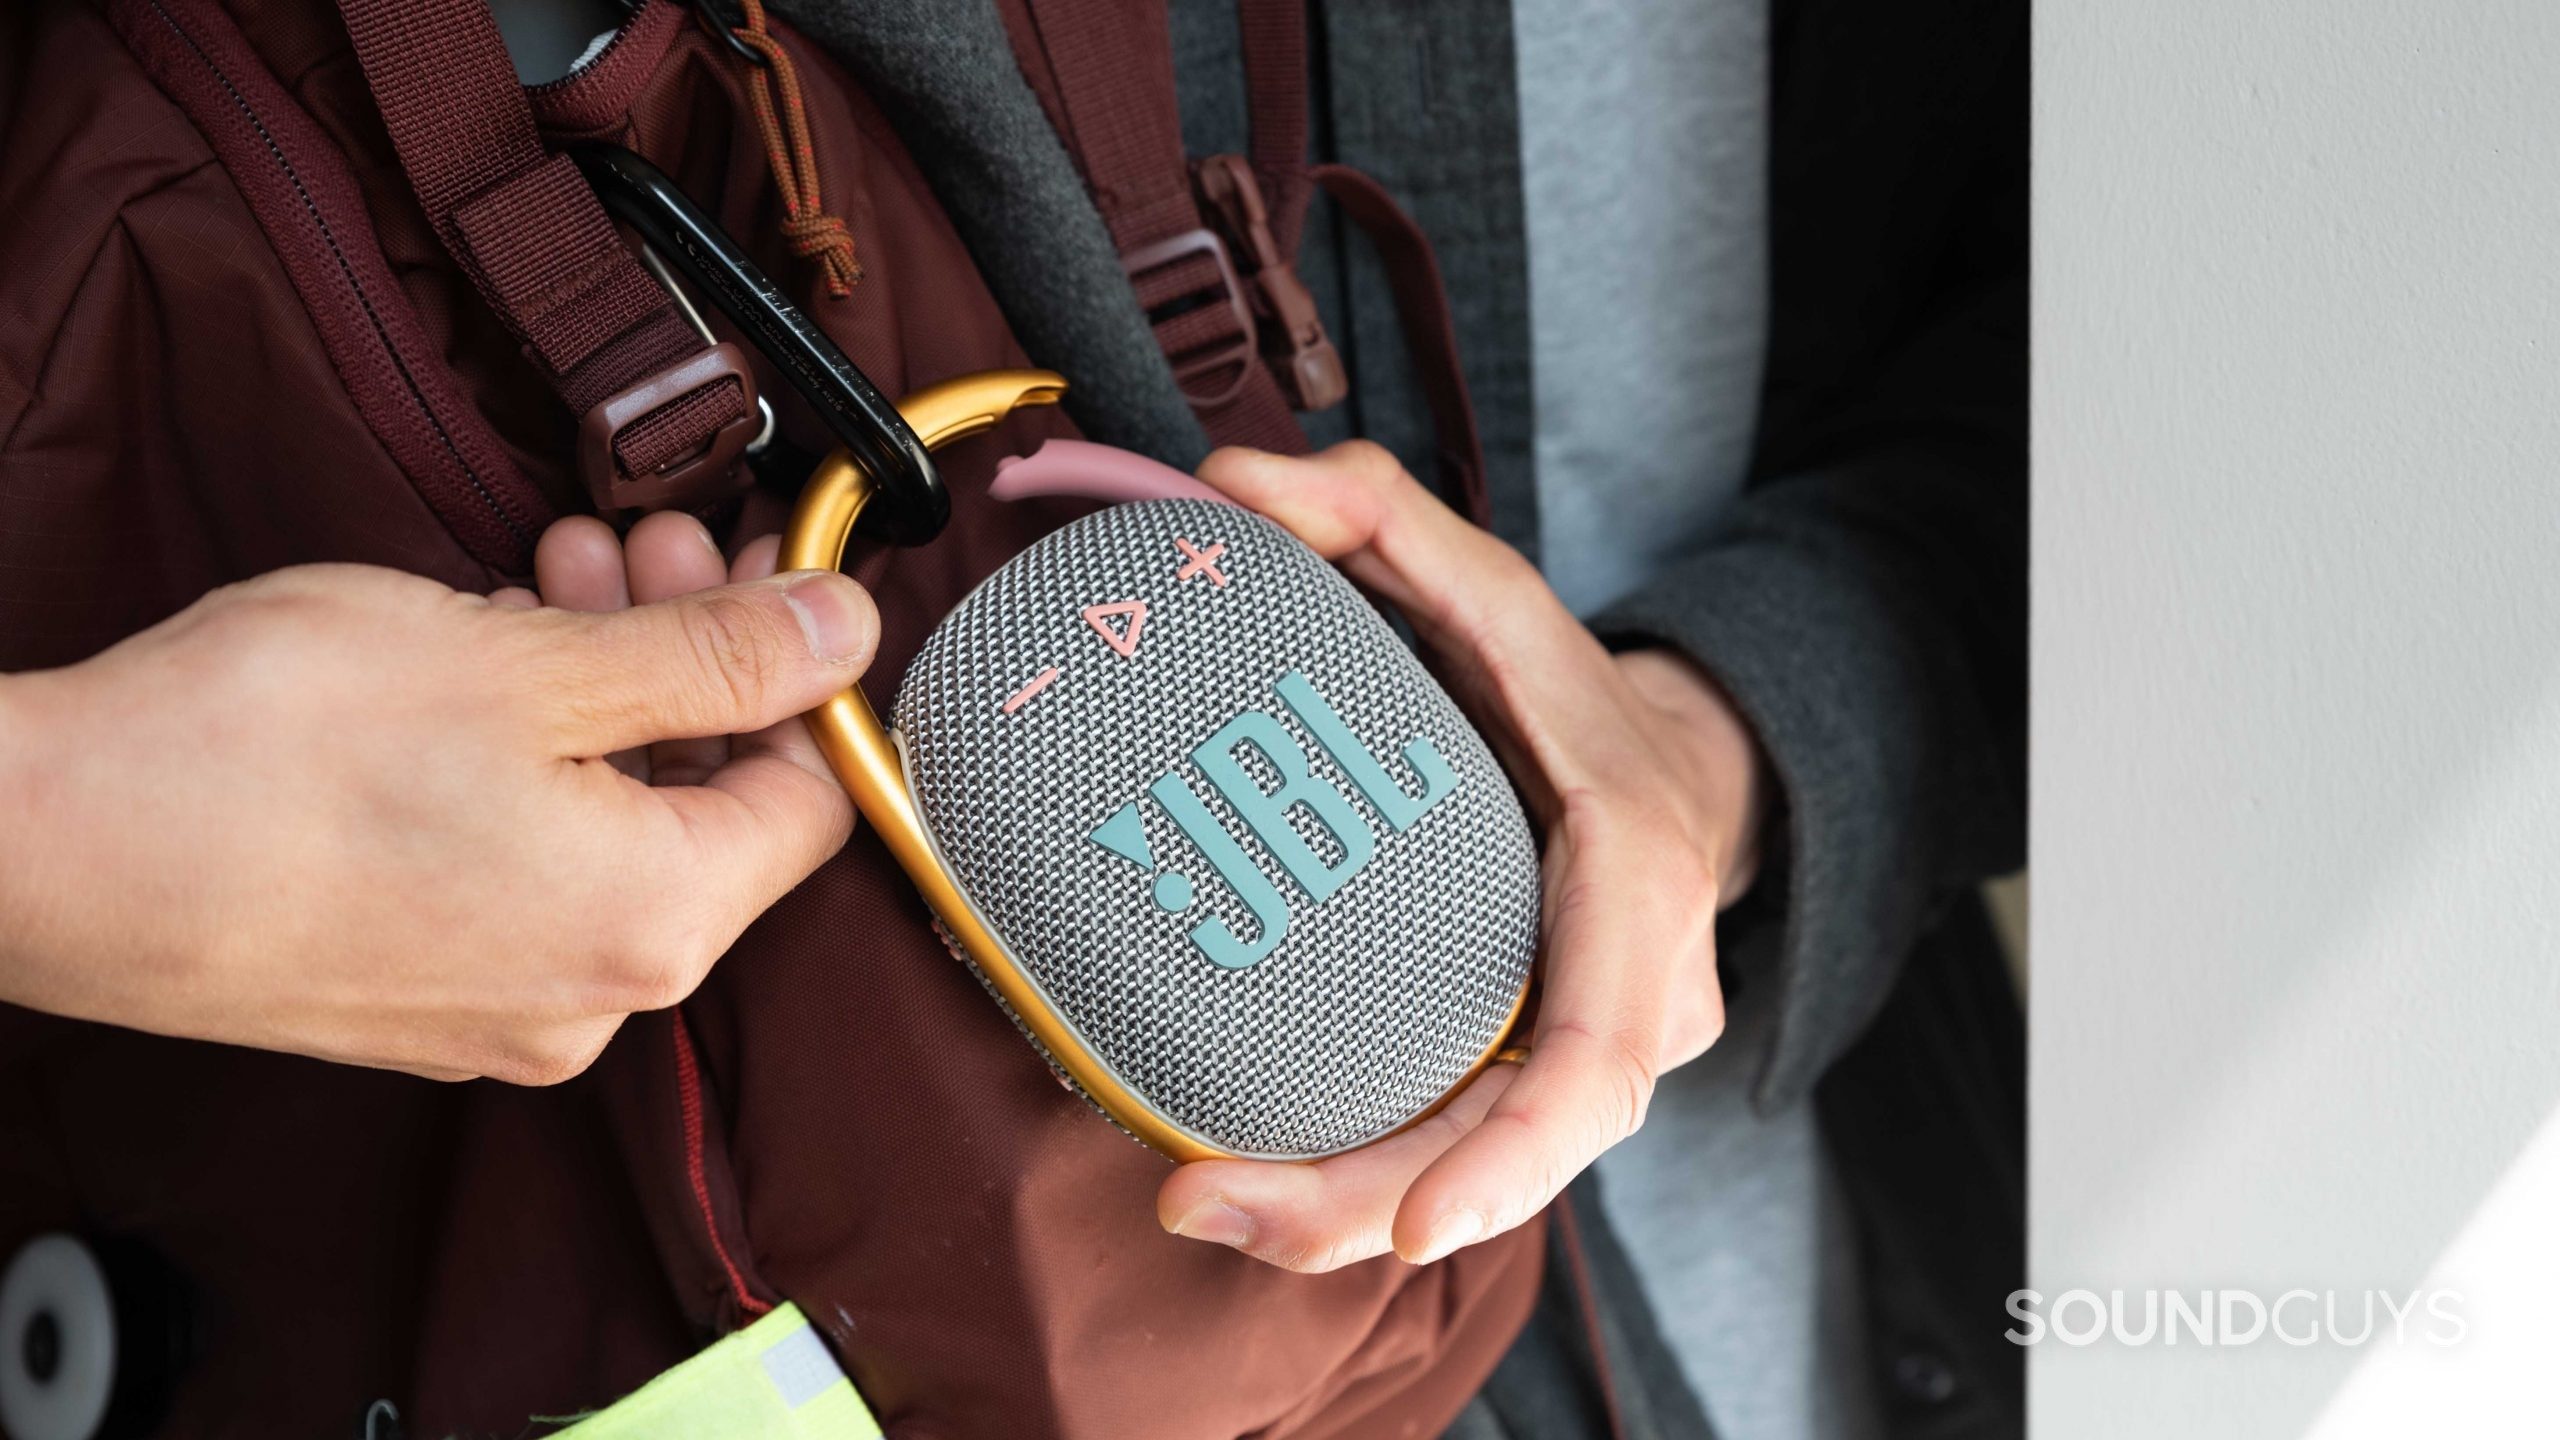 JBL Clip 4 anywhere your Bring music SoundGuys review: 